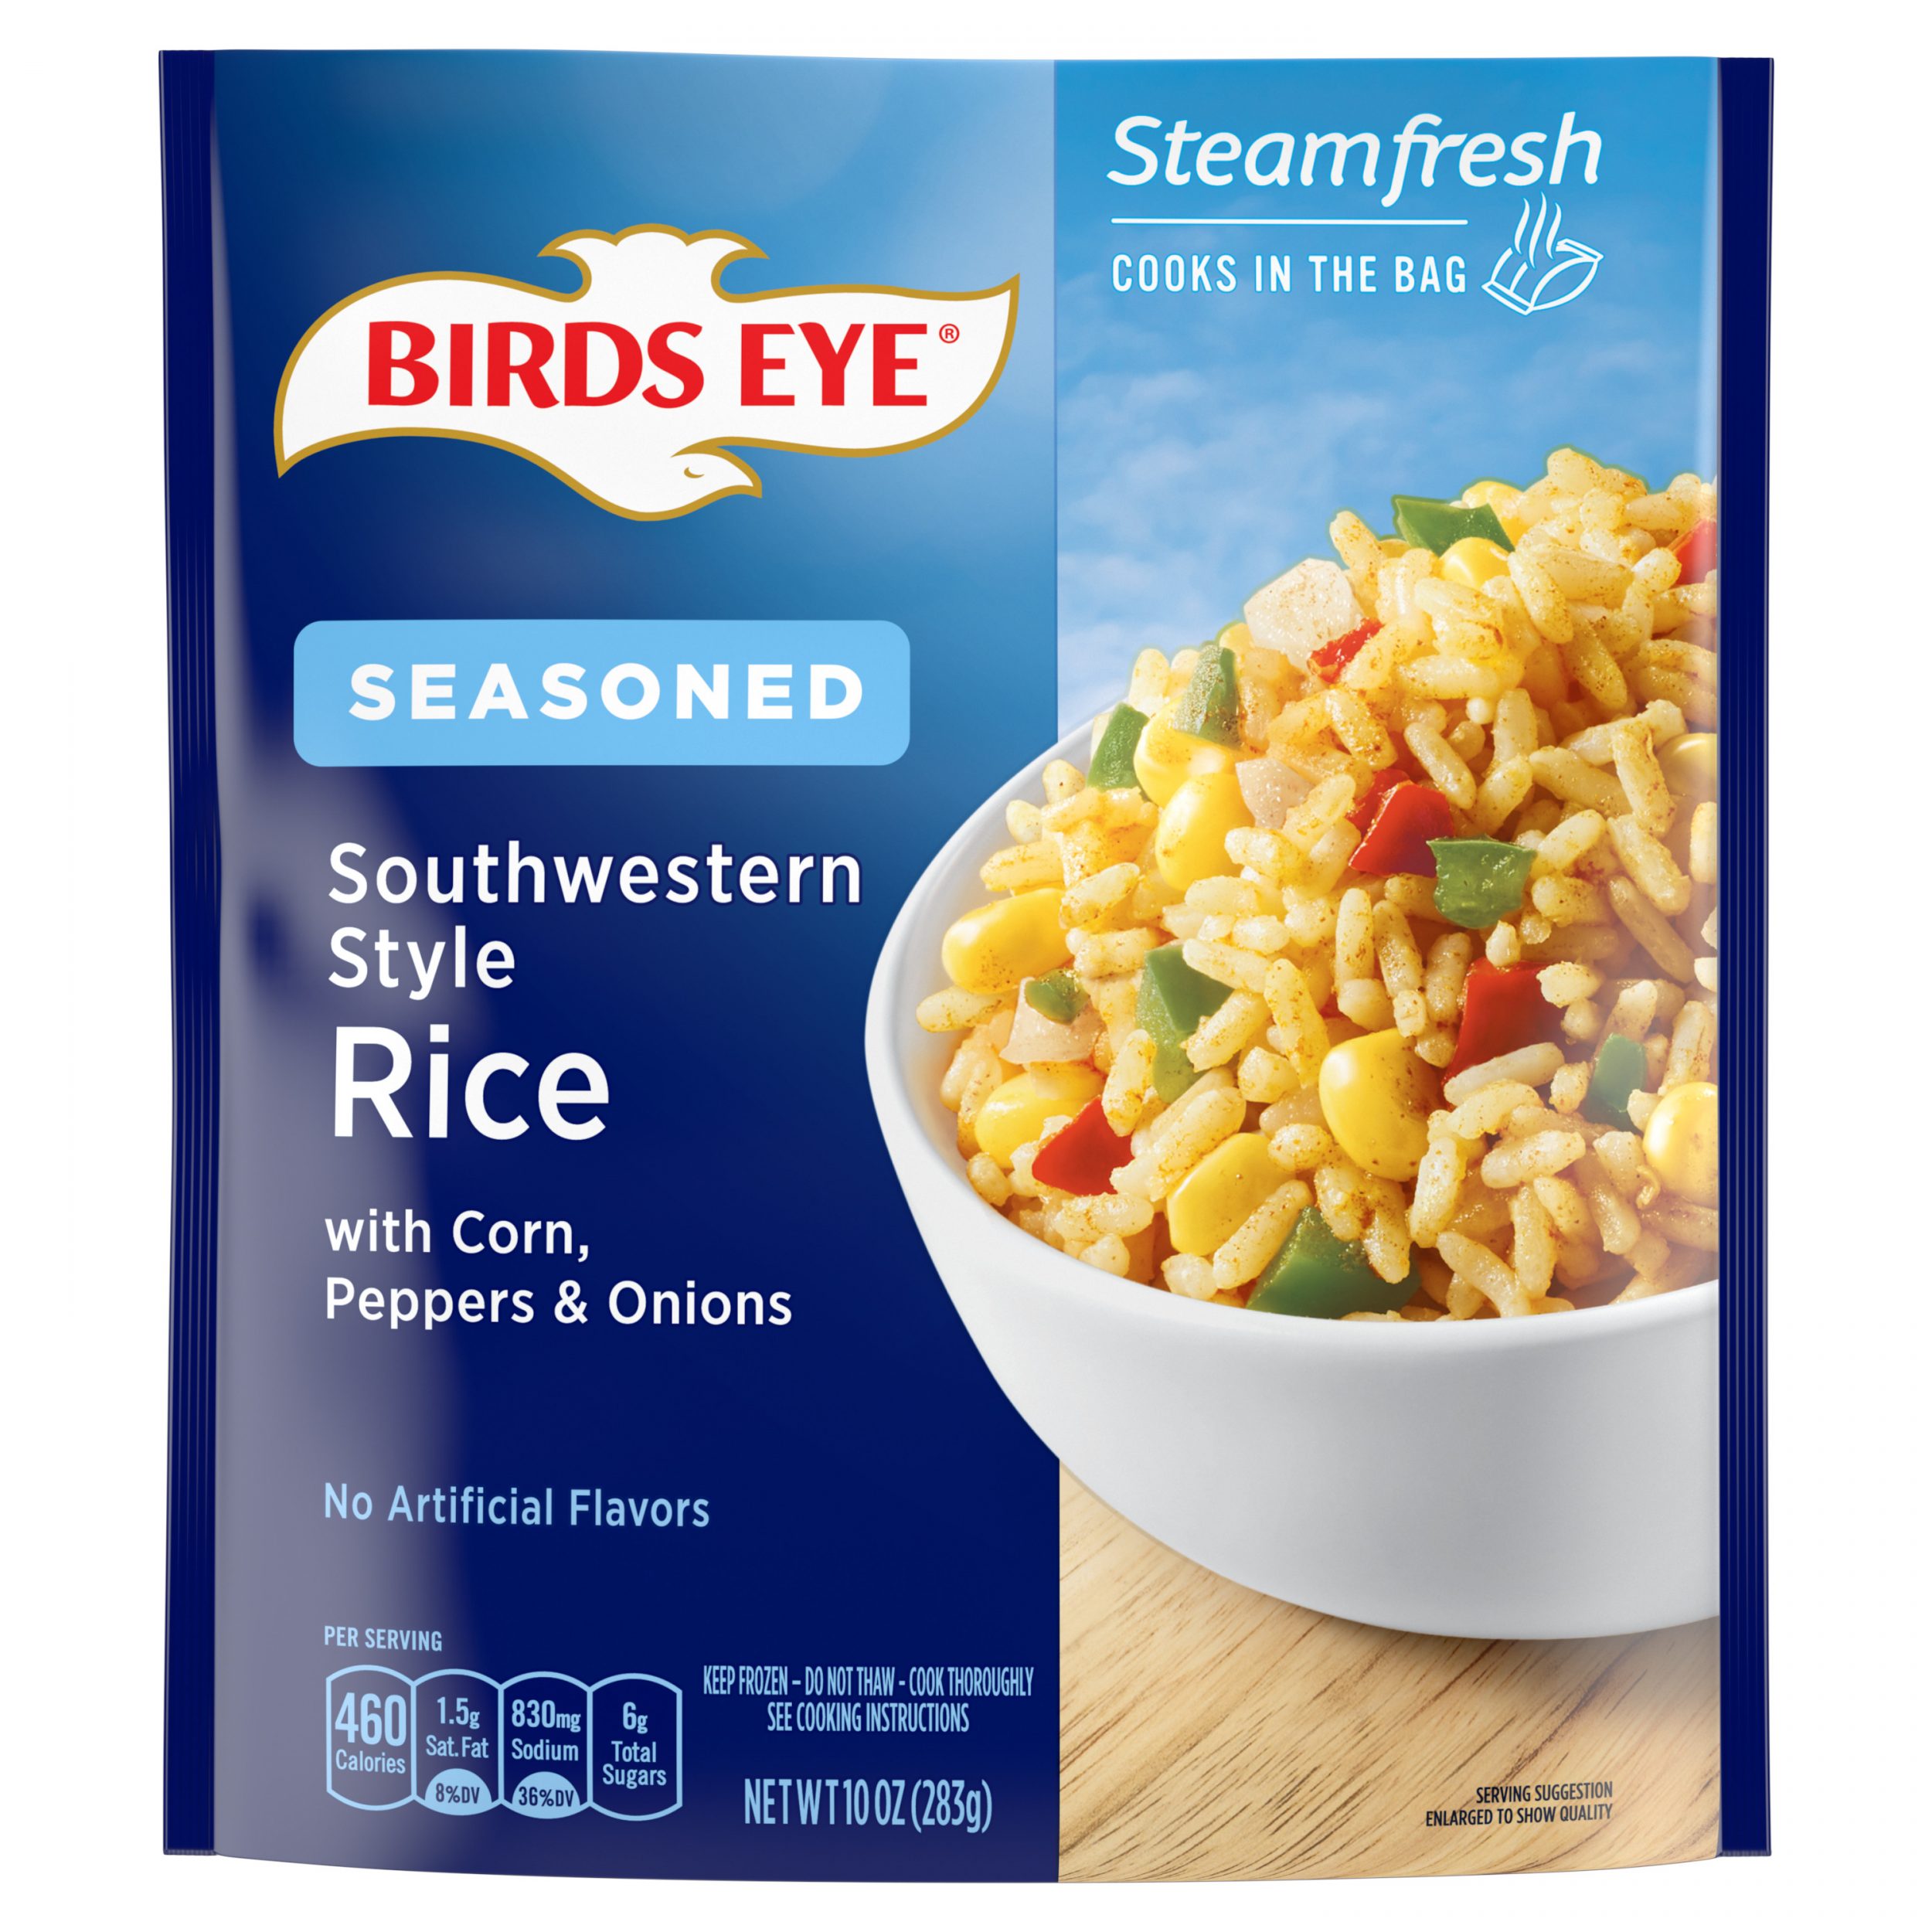 Birds Eye Steamfresh Chef’s Favorites Lightly Seasoned Southwestern Style Rice with Corn, Peppers & Onions